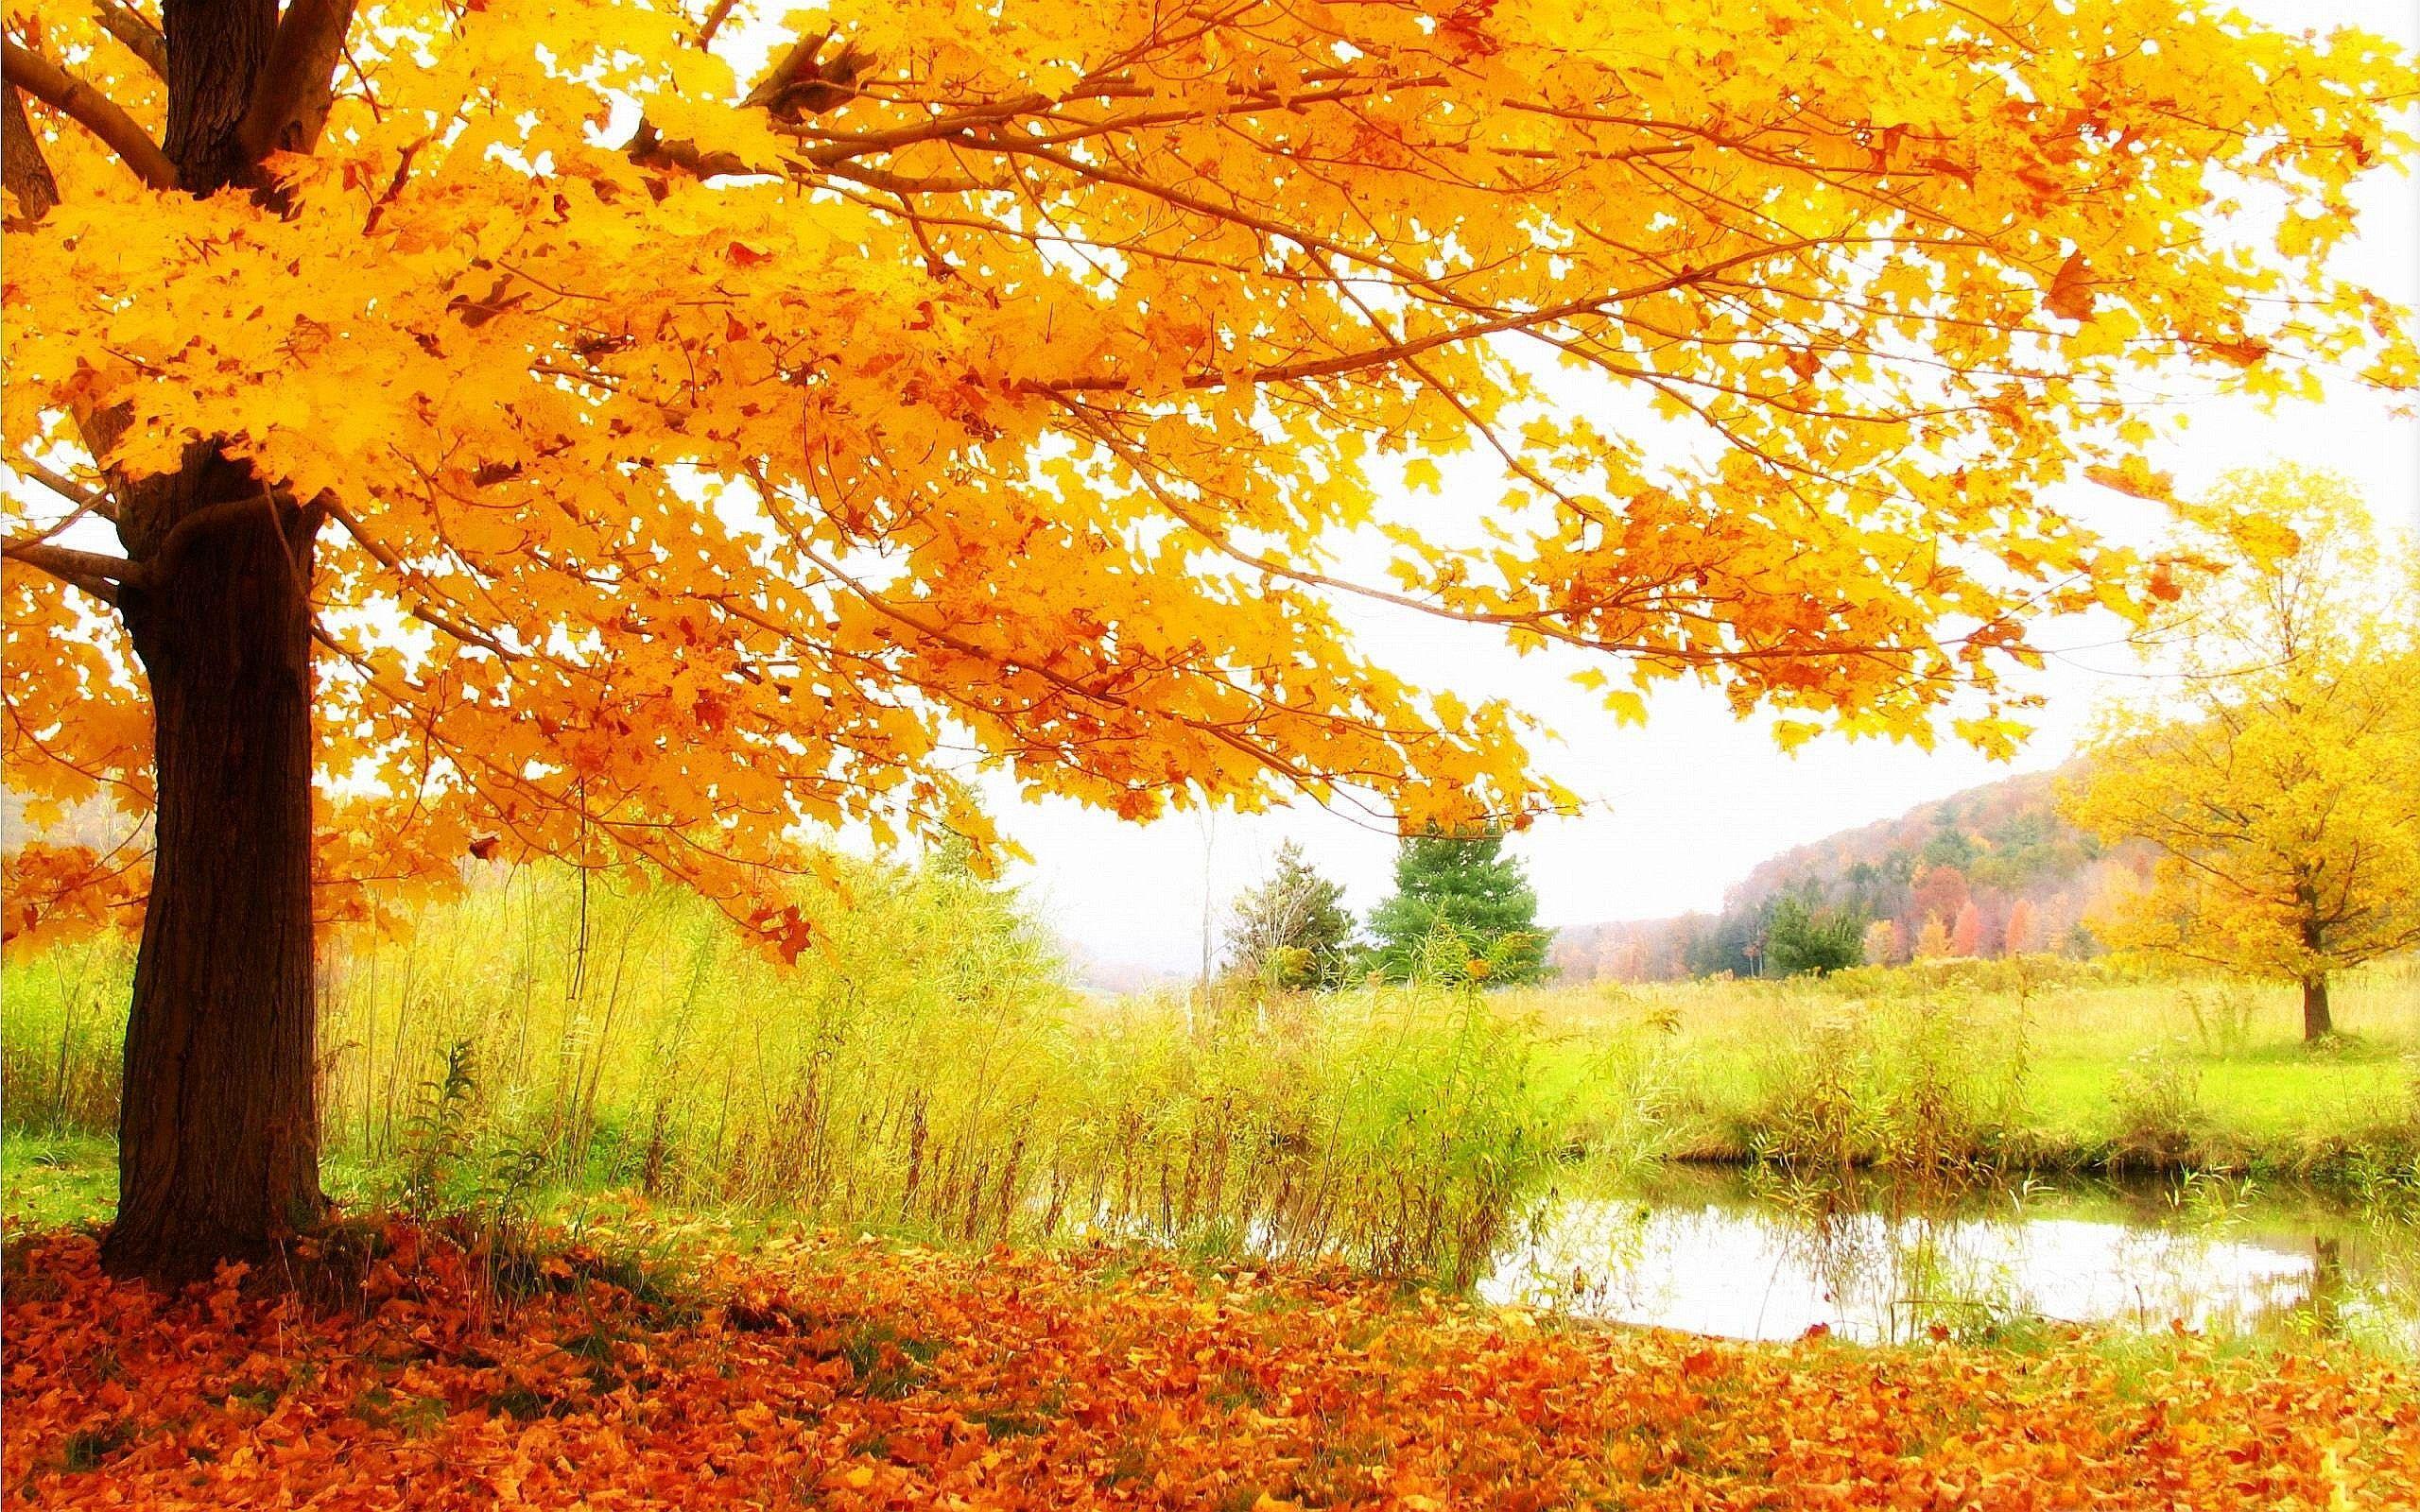 Beautiful Scenery Picture.. enjoy the beautiful scenery and have a cup of relaxing afternoon tea. Scenery wallpaper, Autumn scenery, Autumn landscape